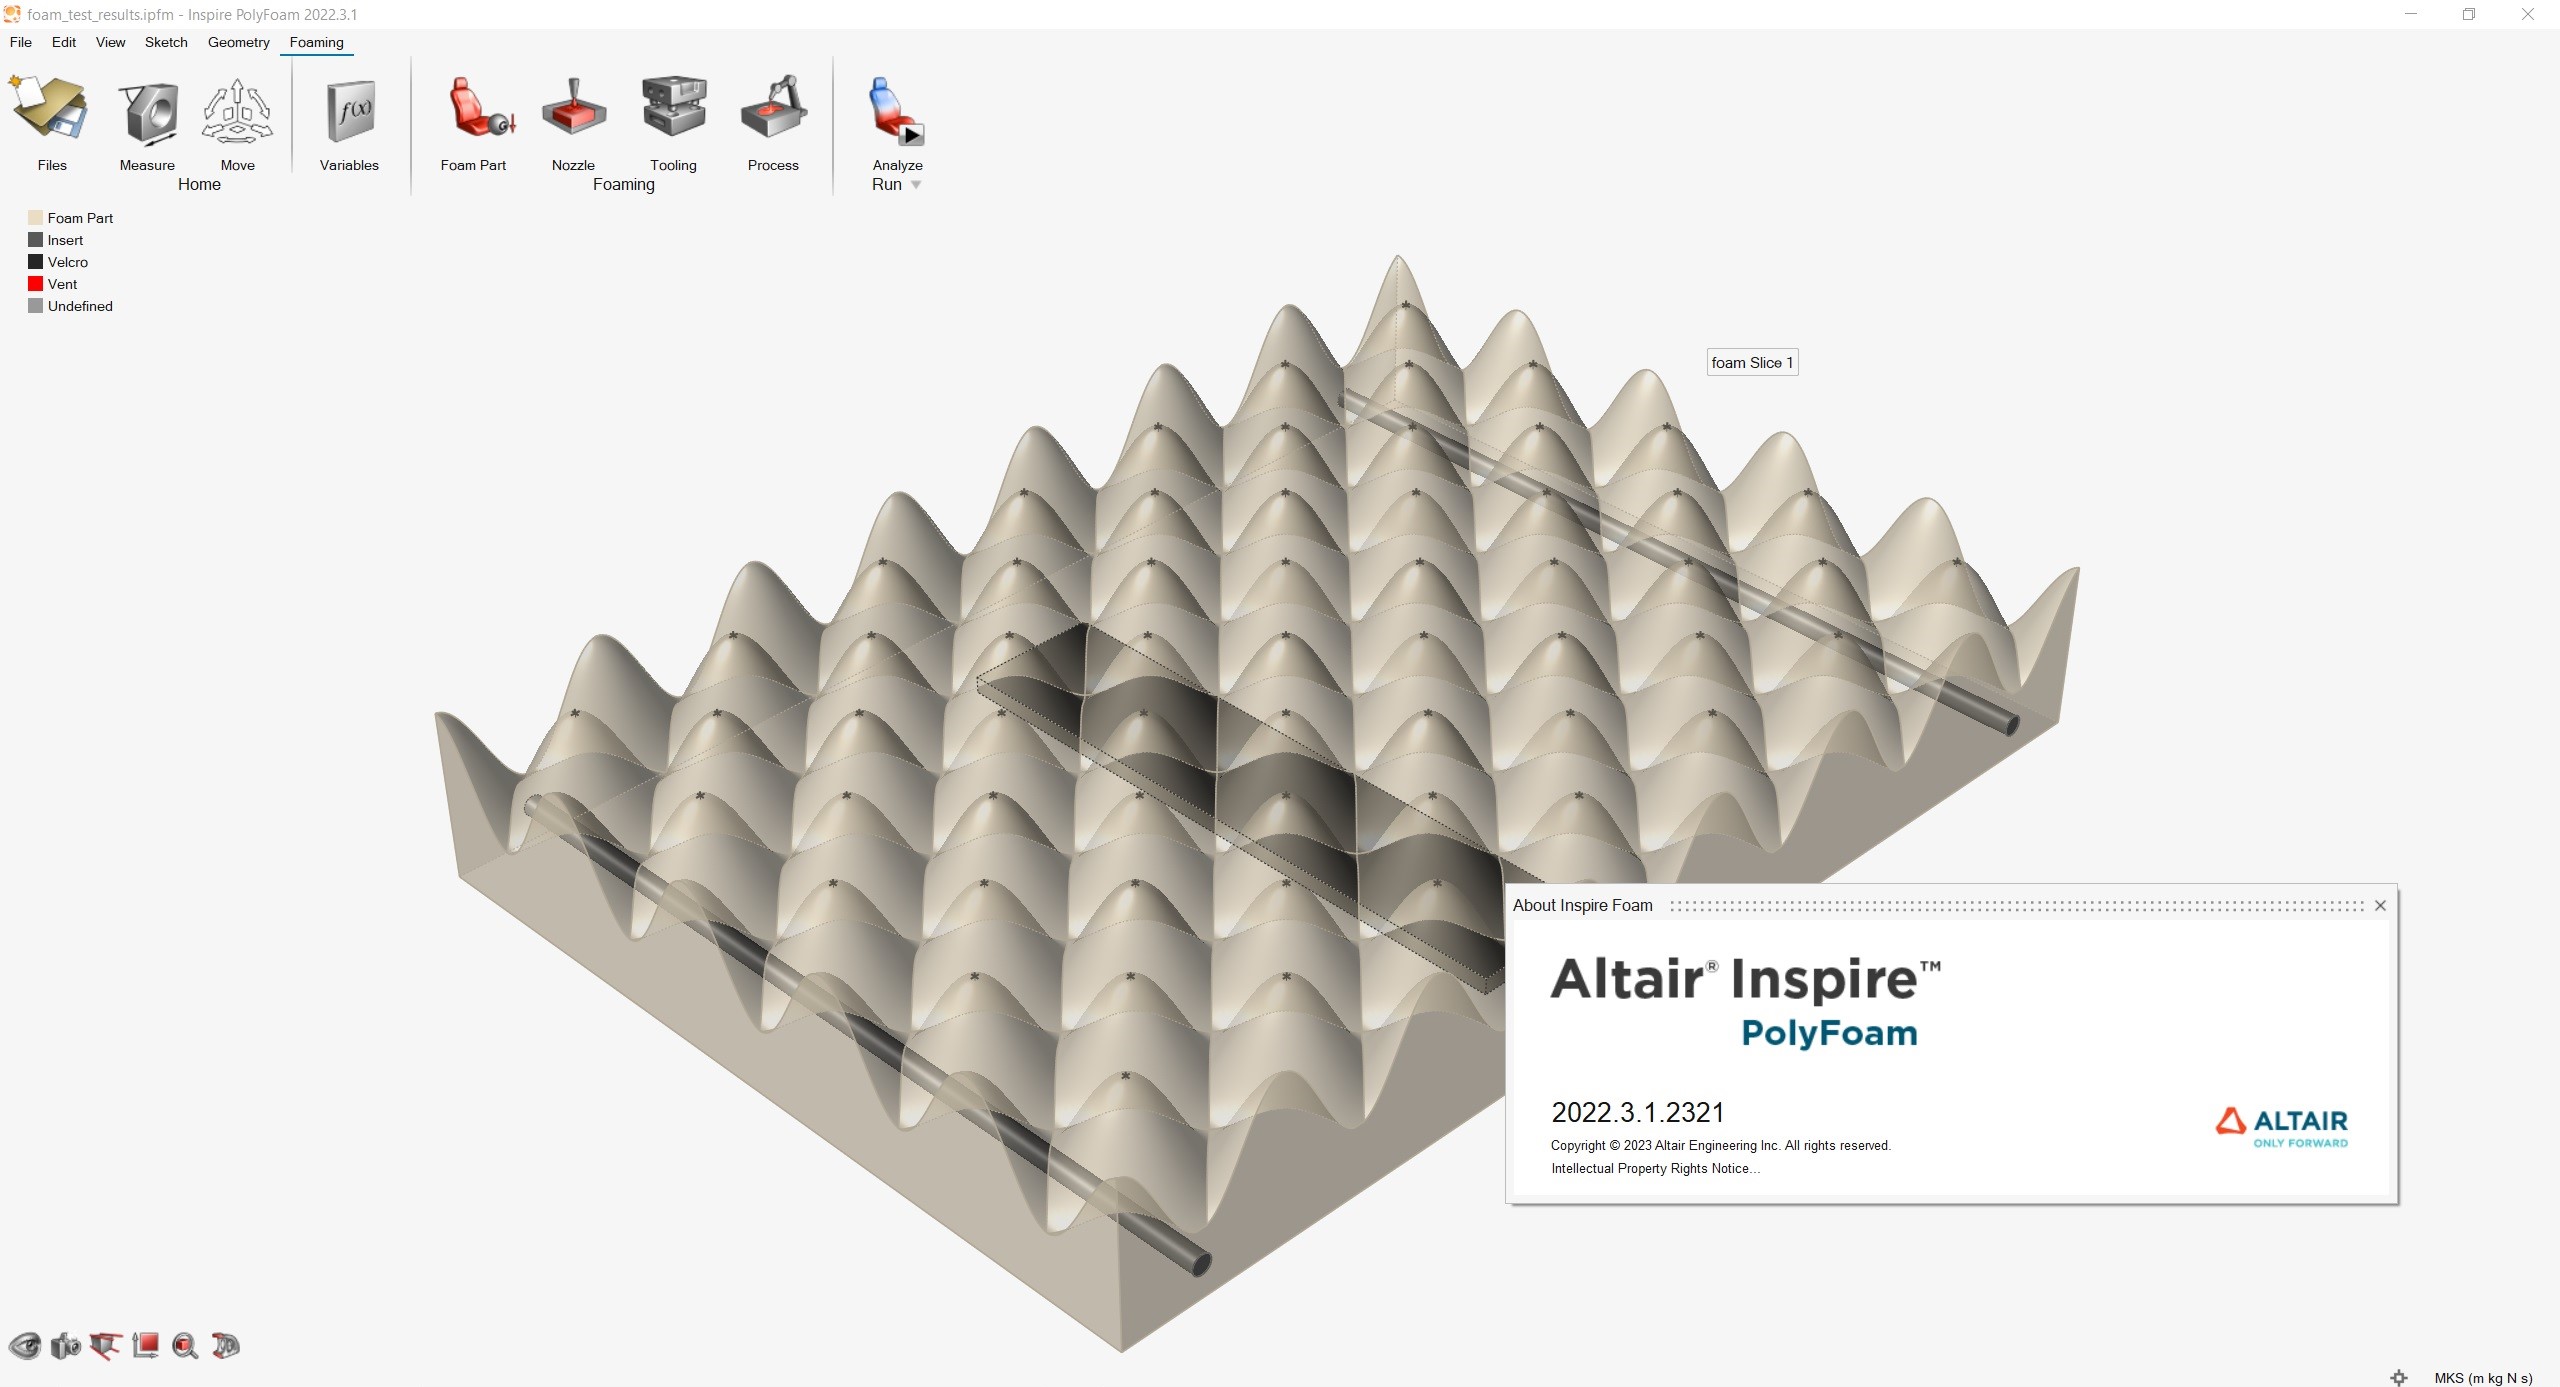 Working with Altair Inspire PolyFoam 2022.3.1 full license